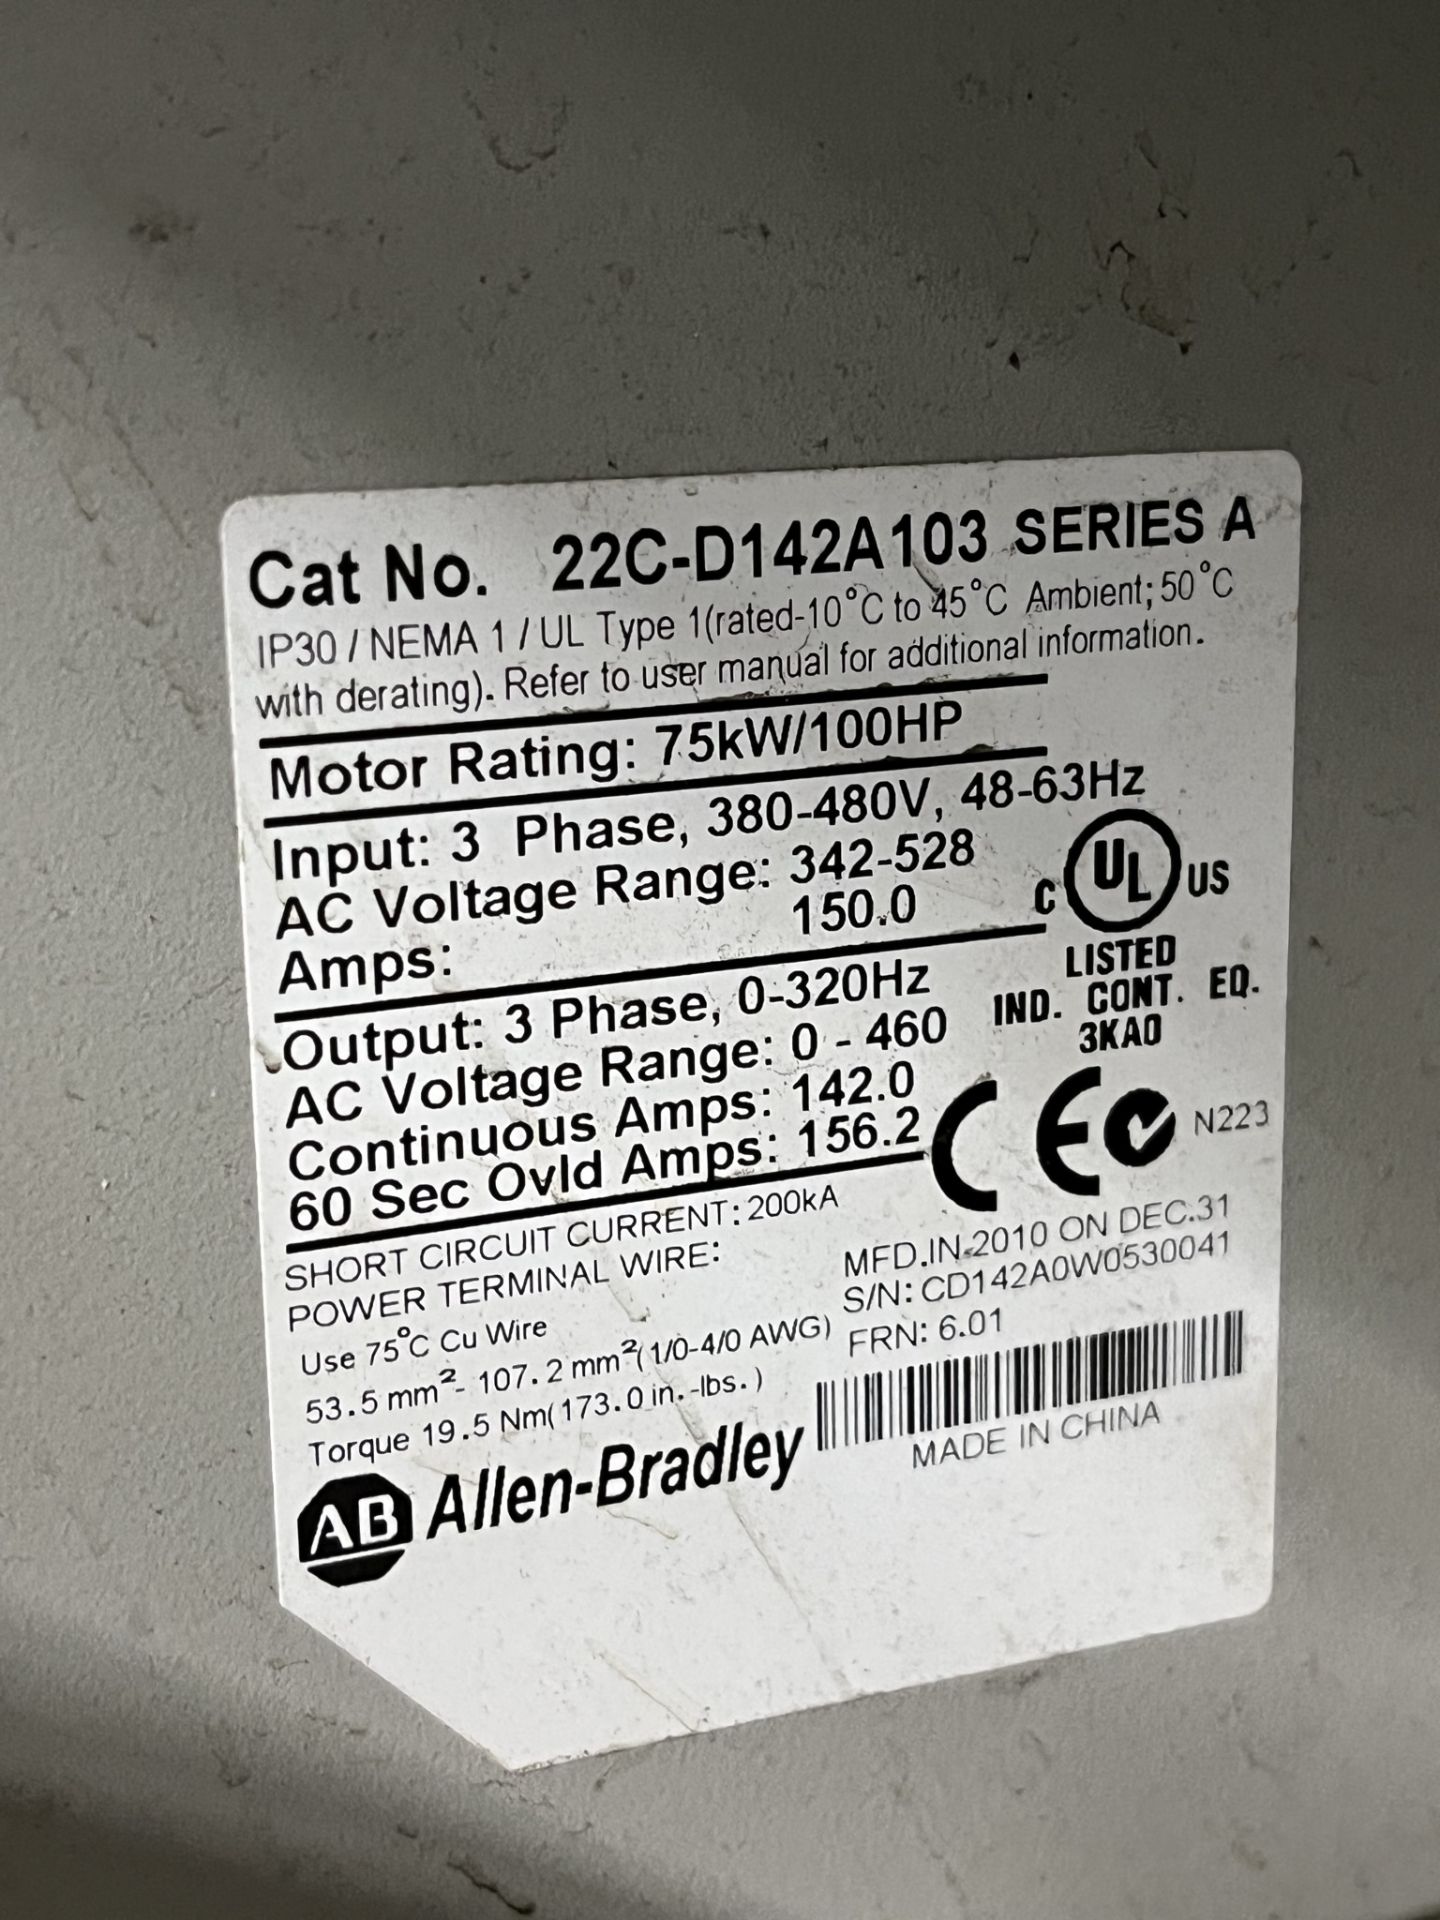 ALLEN BRADLEY POWER FLEX 400 CAT NO. 22C-D142A103 SERIES A MOTOR RATING:75KW/100HP INPUT:3 PHASE - Image 4 of 4